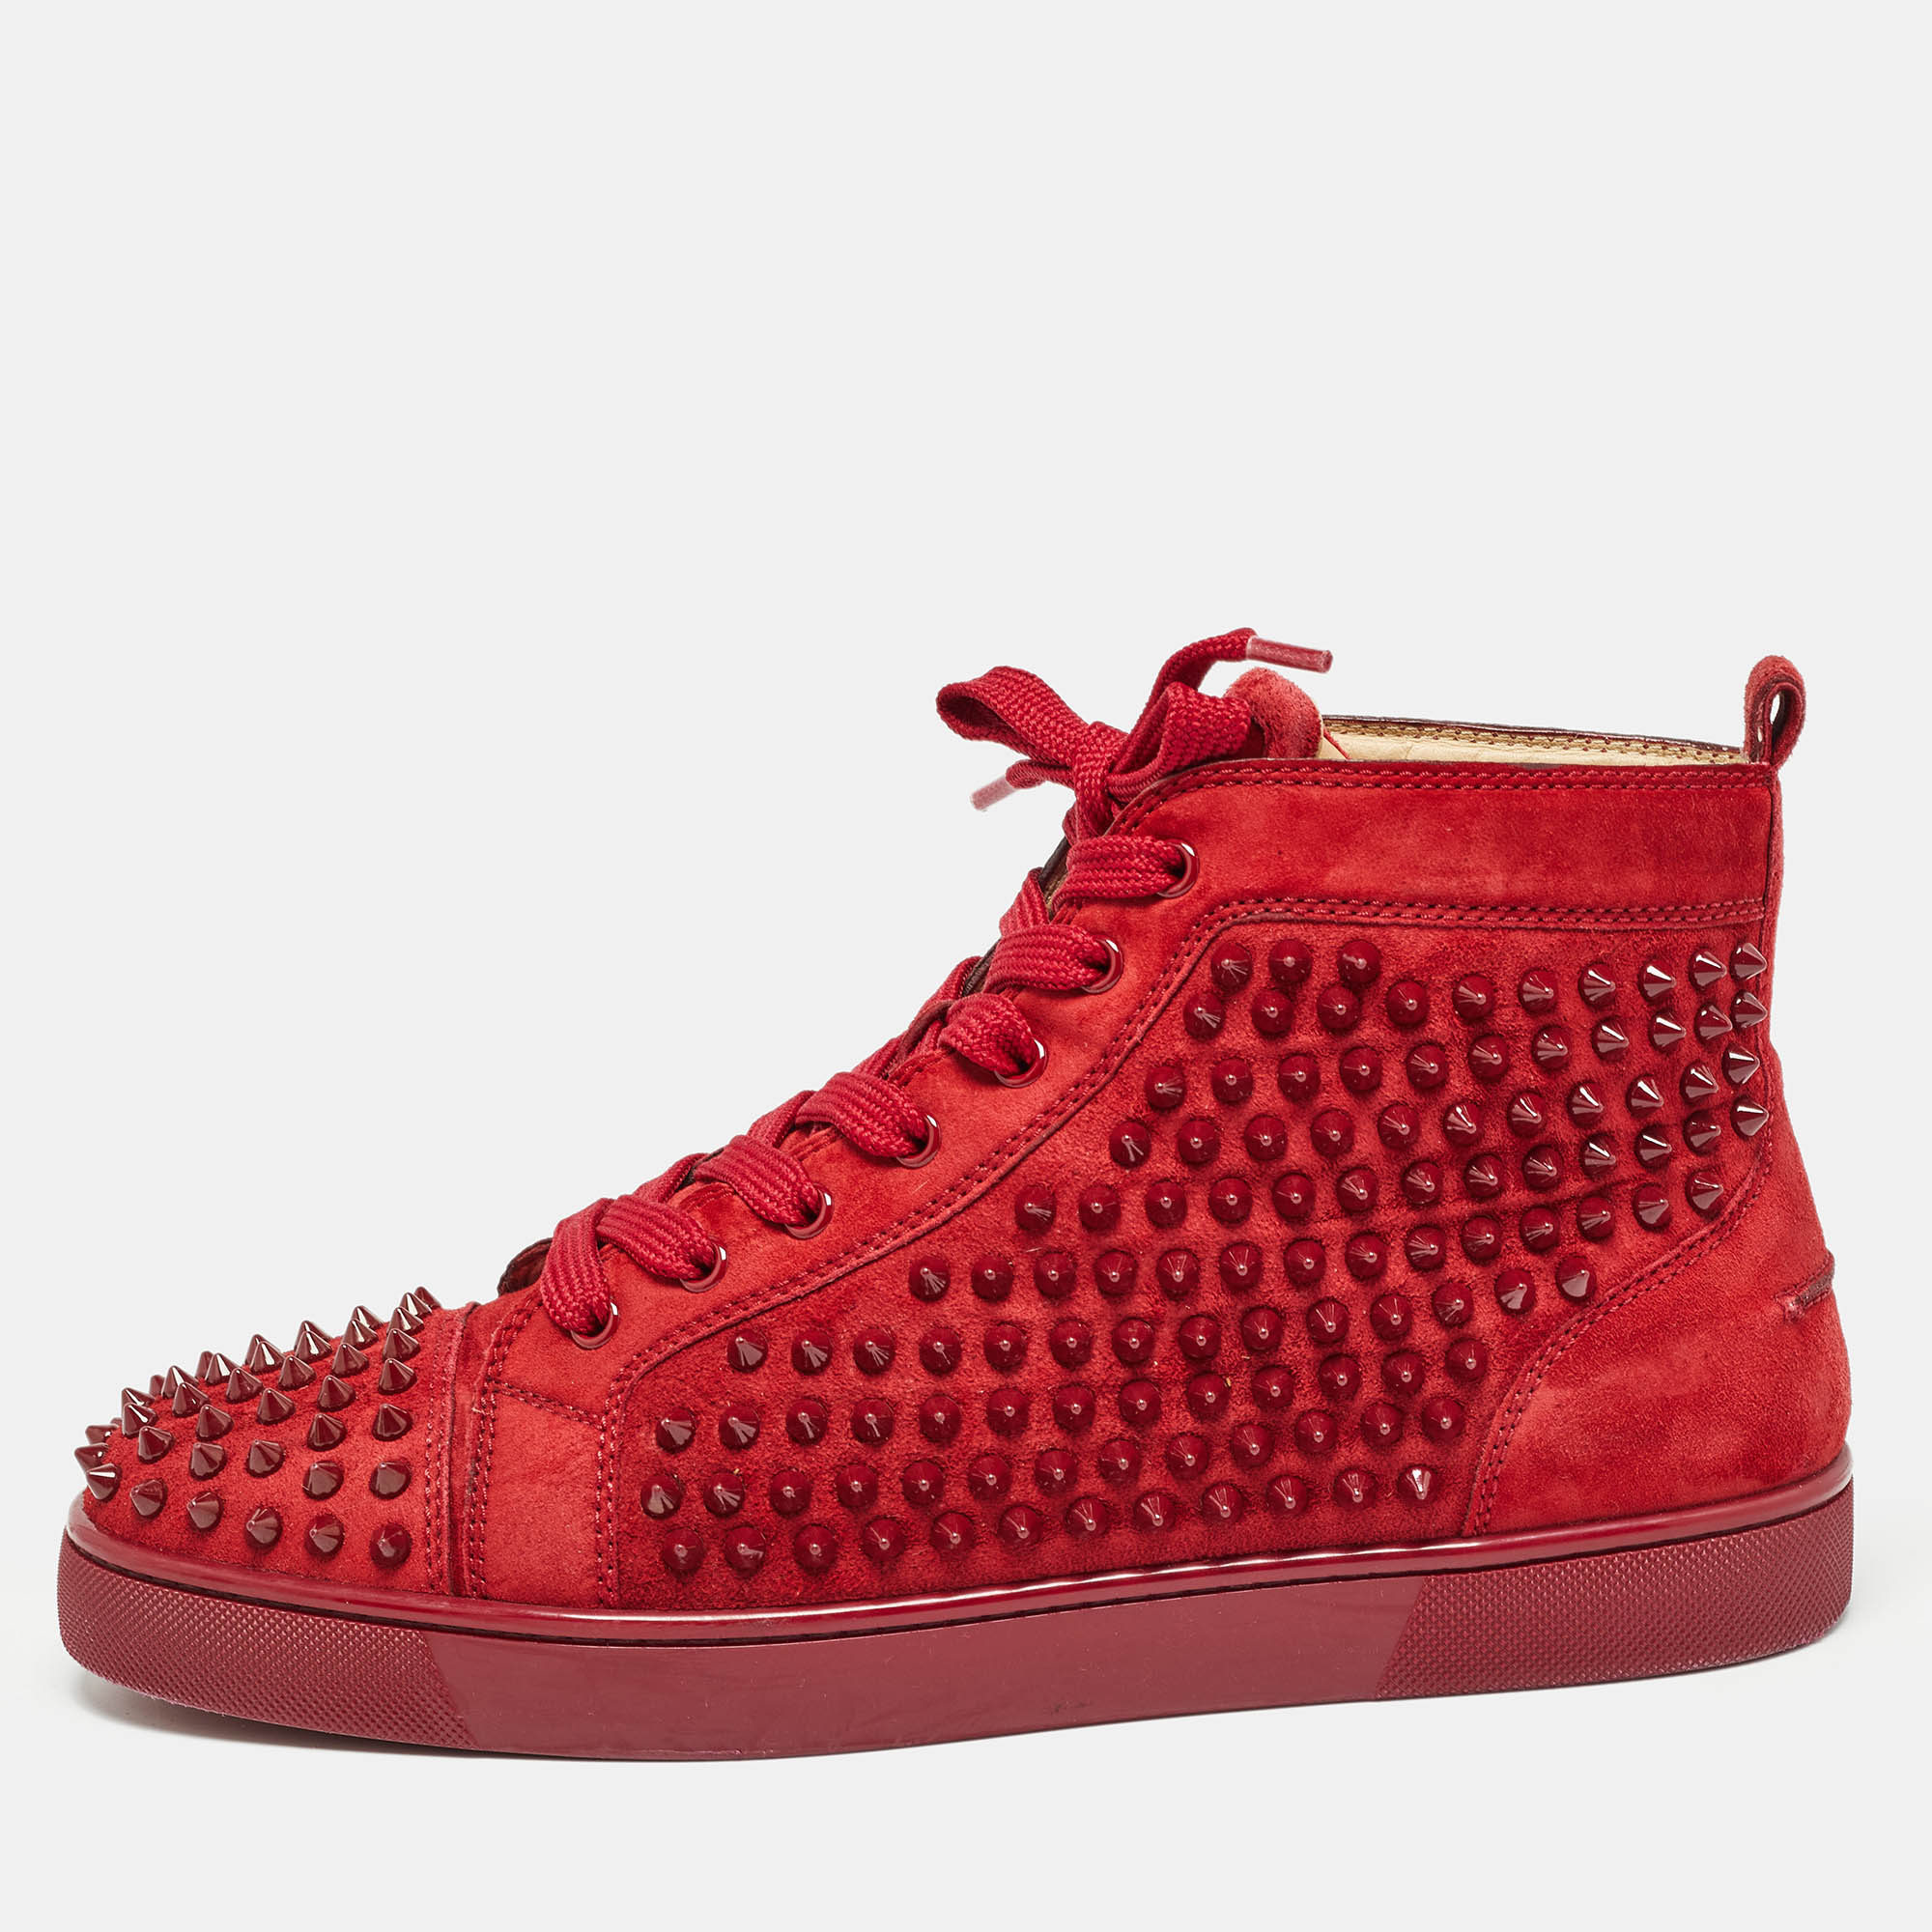 Christian louboutin red suede louis spike high top sneakers size 43